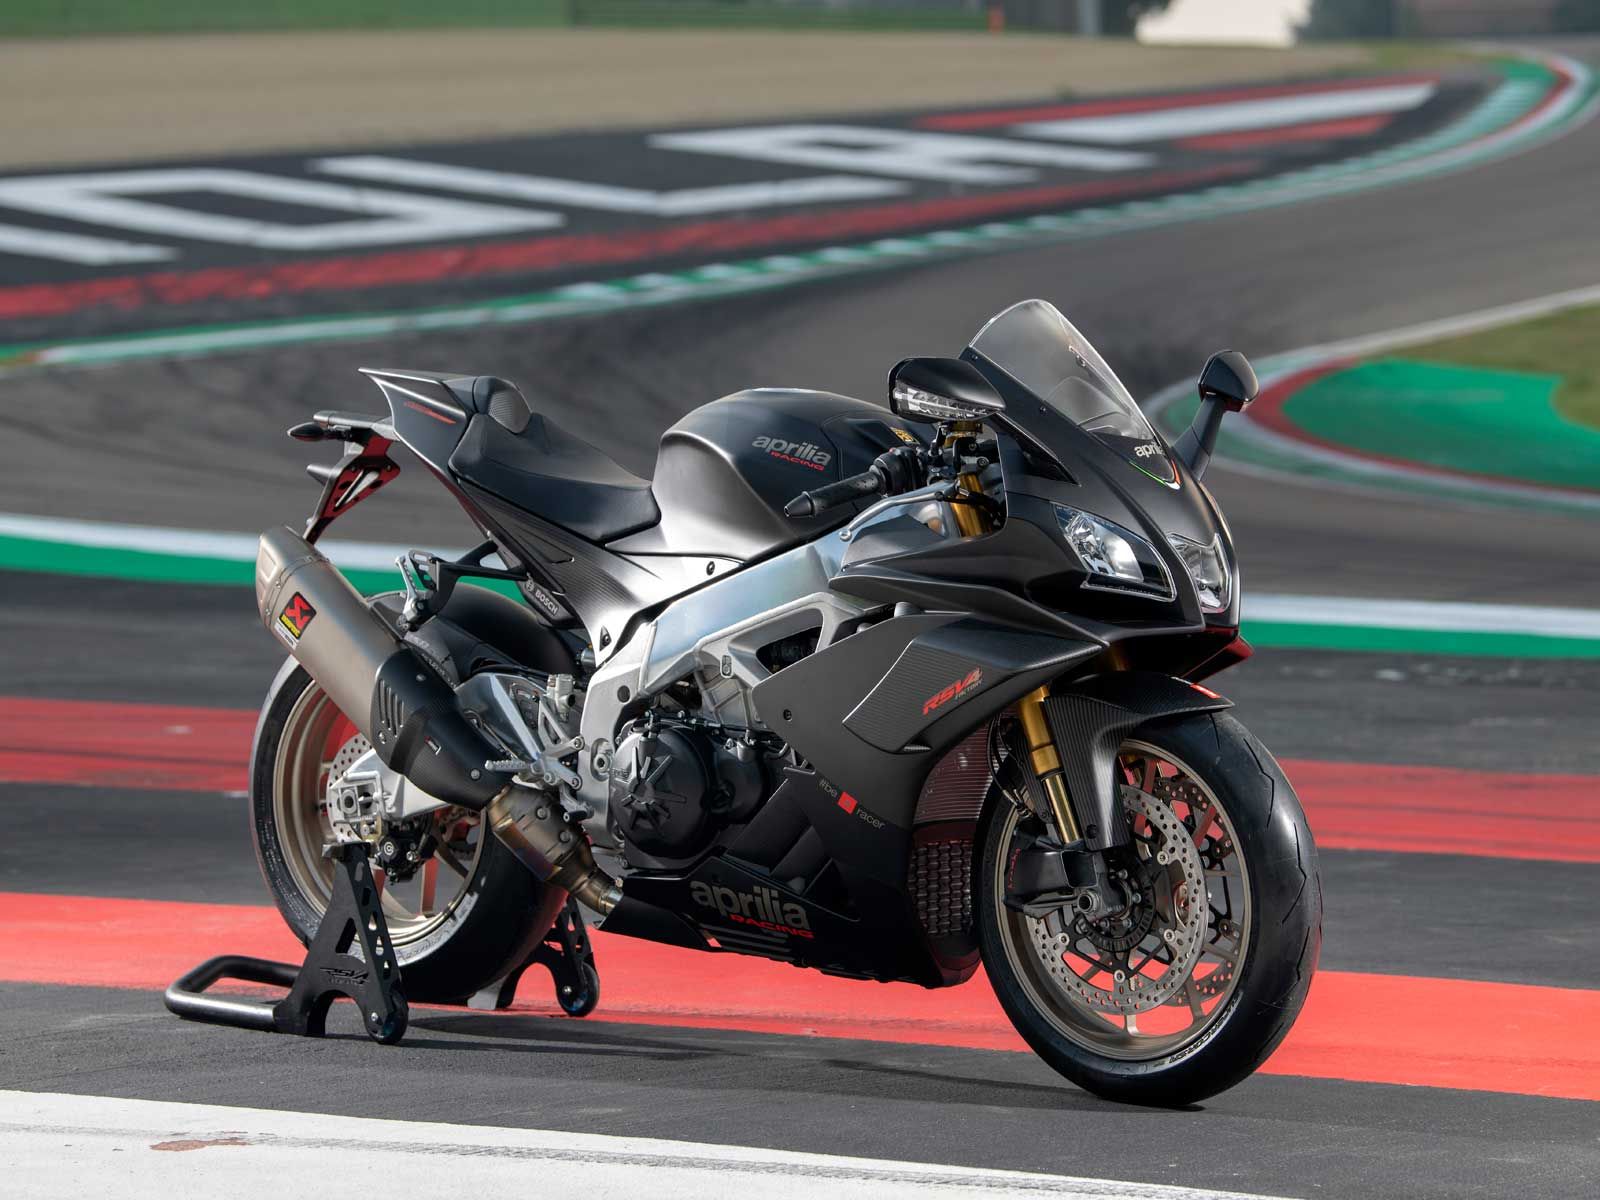 2020 Aprilia RSV4 1100 Factory parked at the racing track